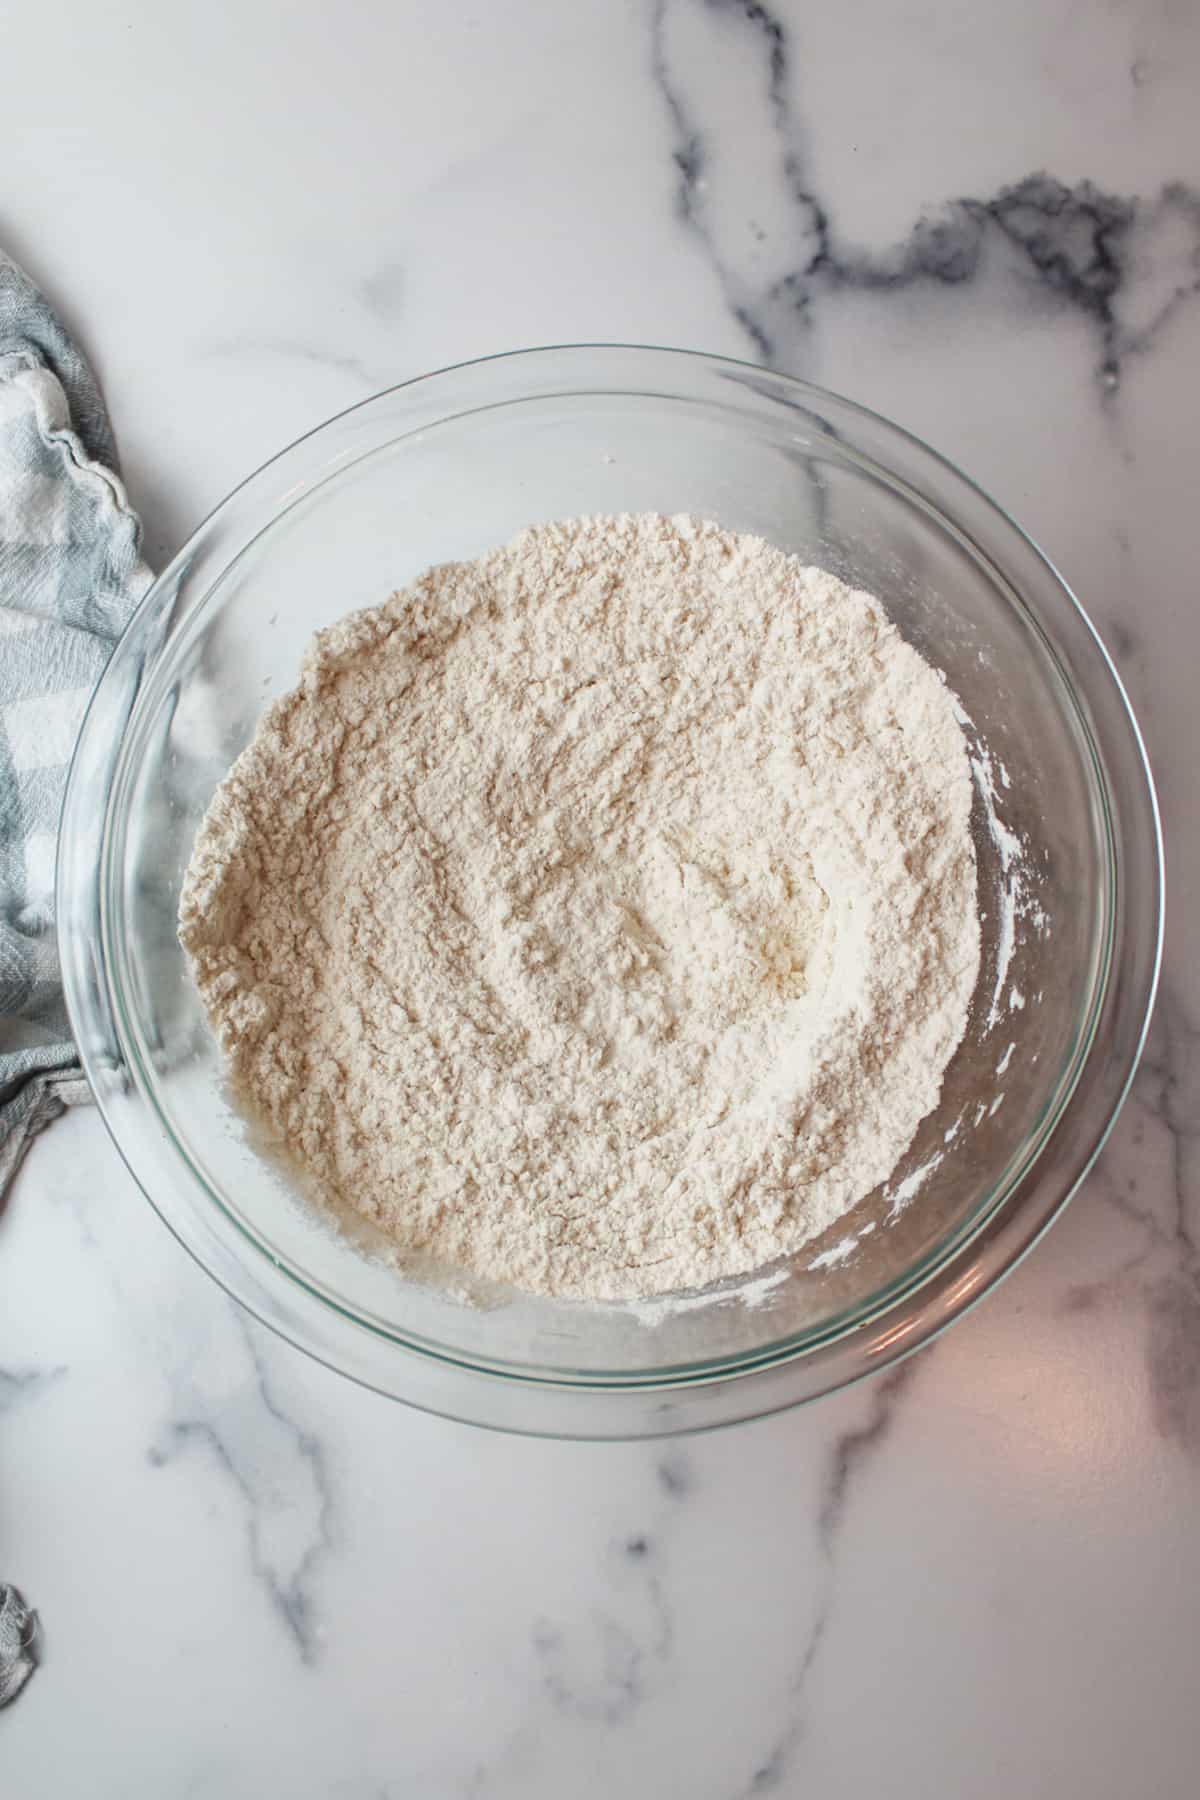 whisked yeast and flour mixture in a mixing bowl.